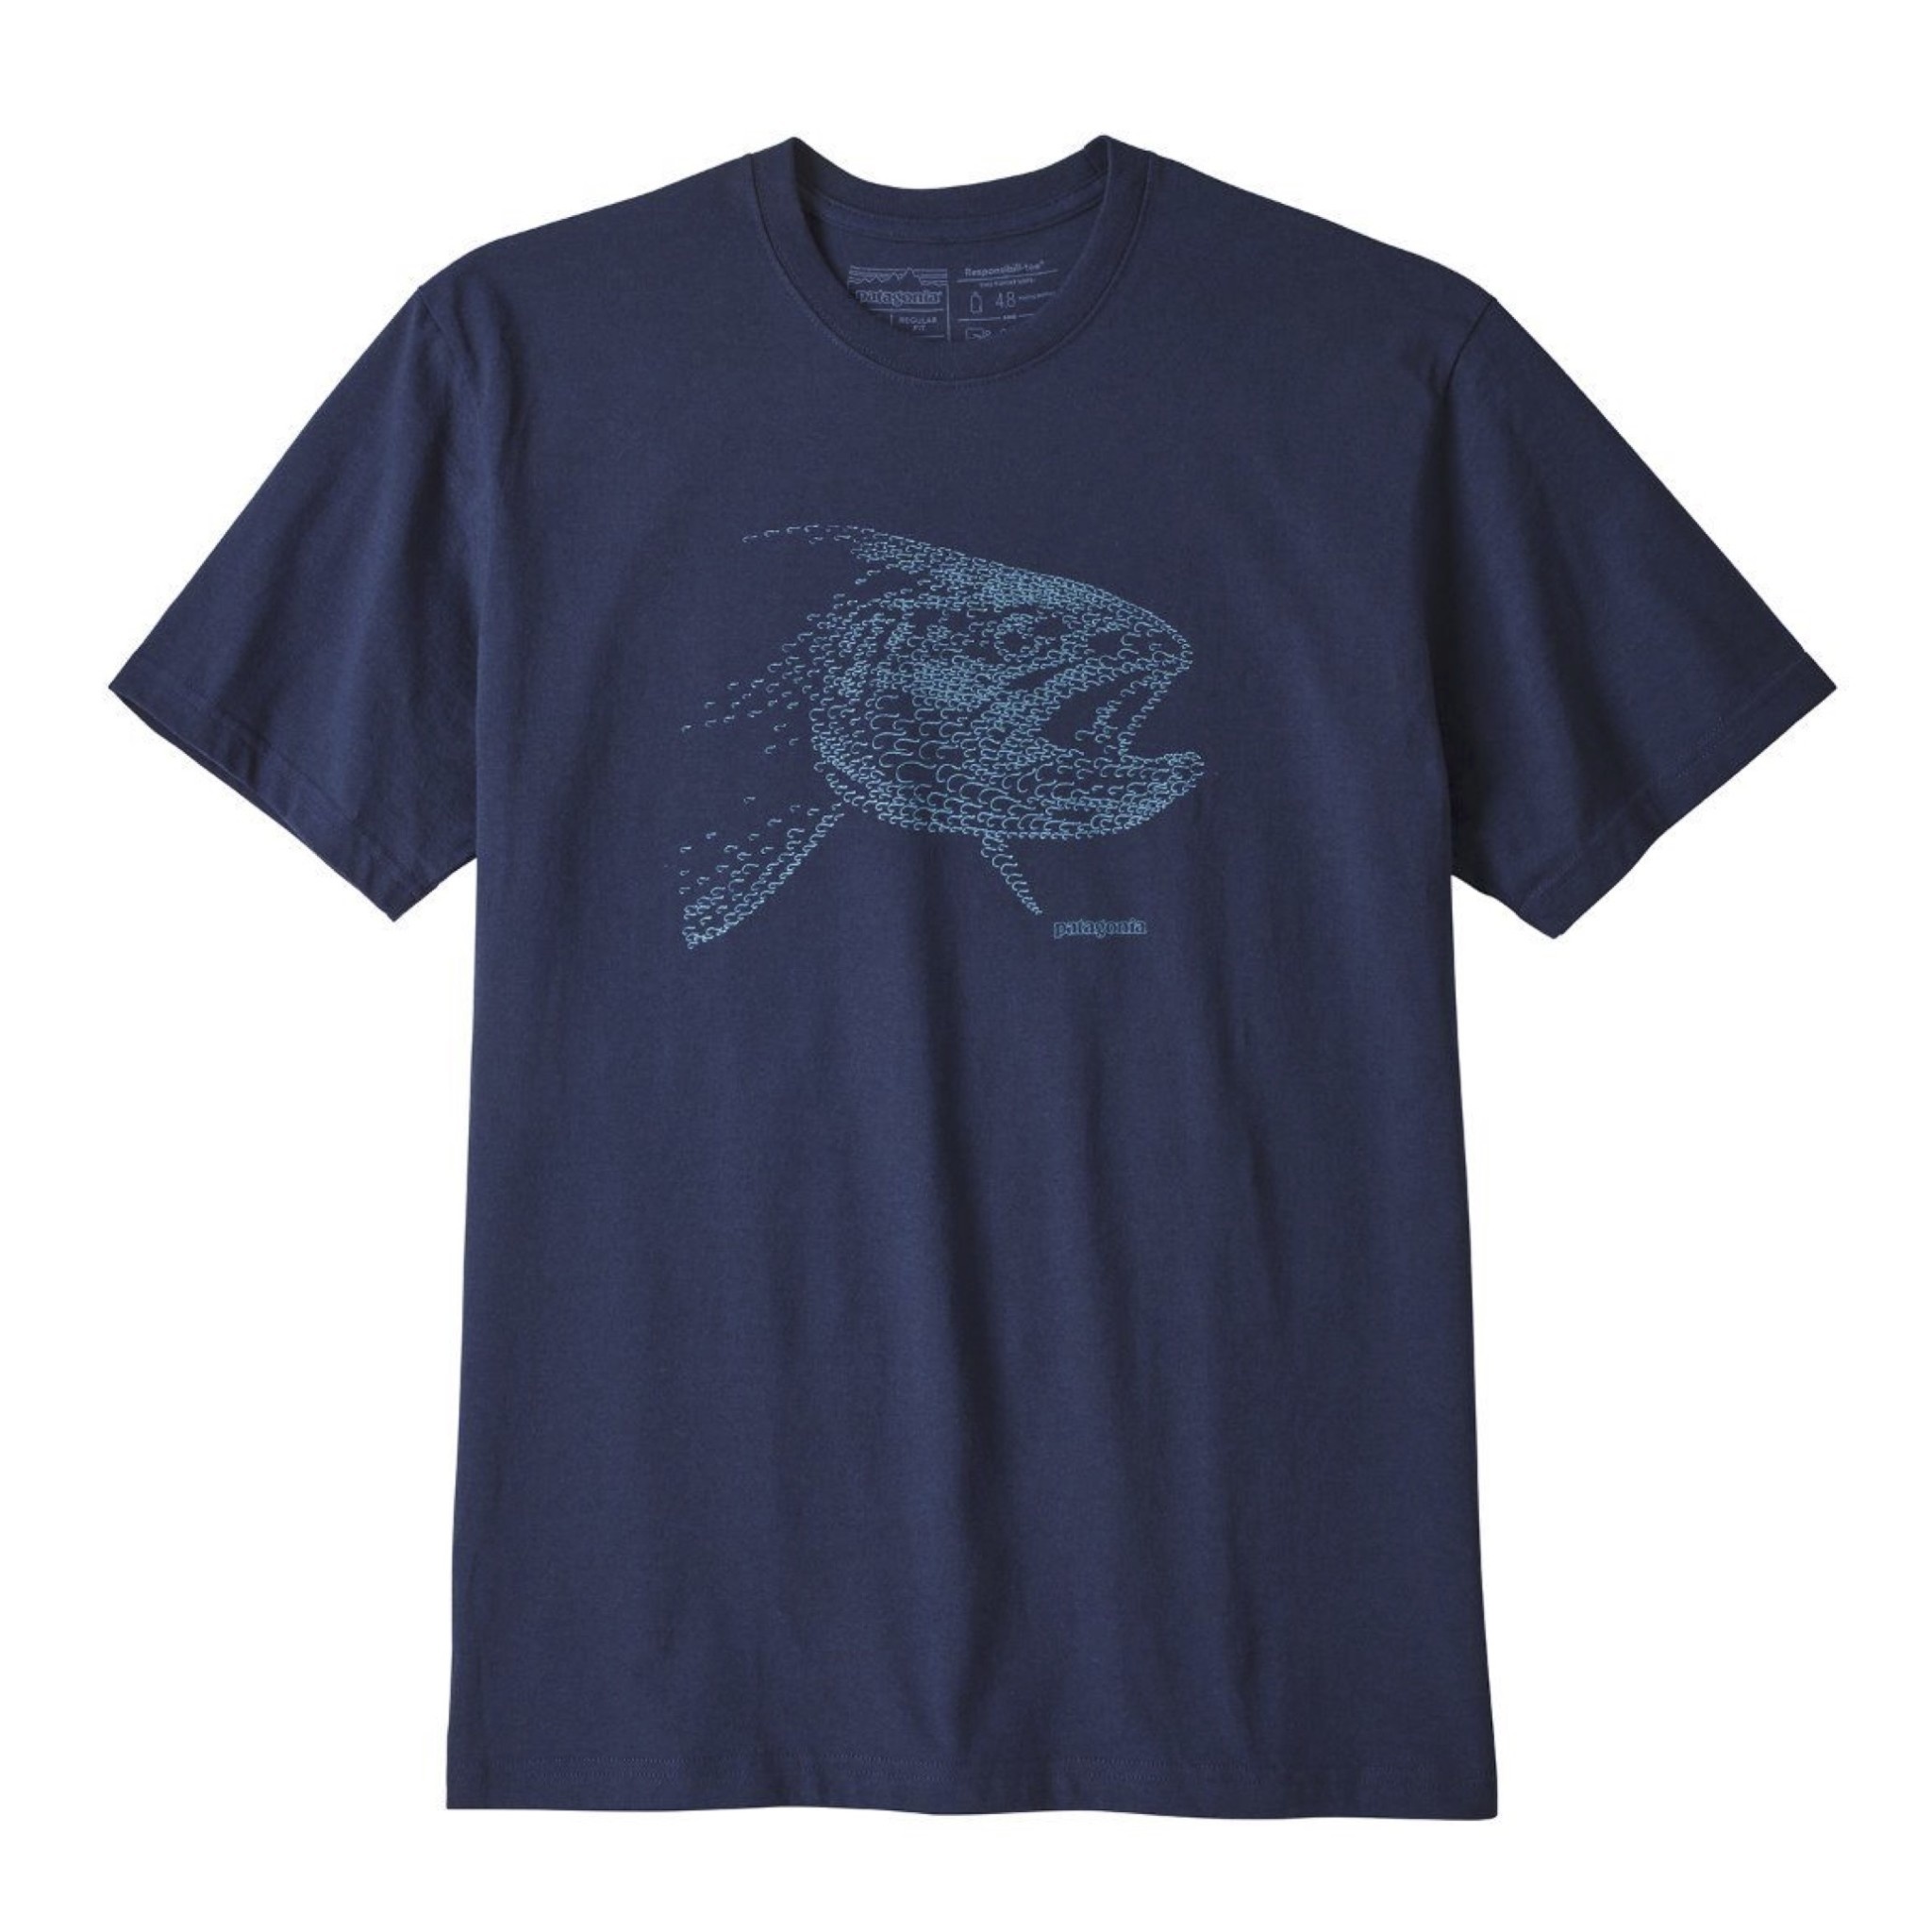 Patagonia M's Hooked Head Responsibili-Tee - Classic Navy w/ Trout - Small